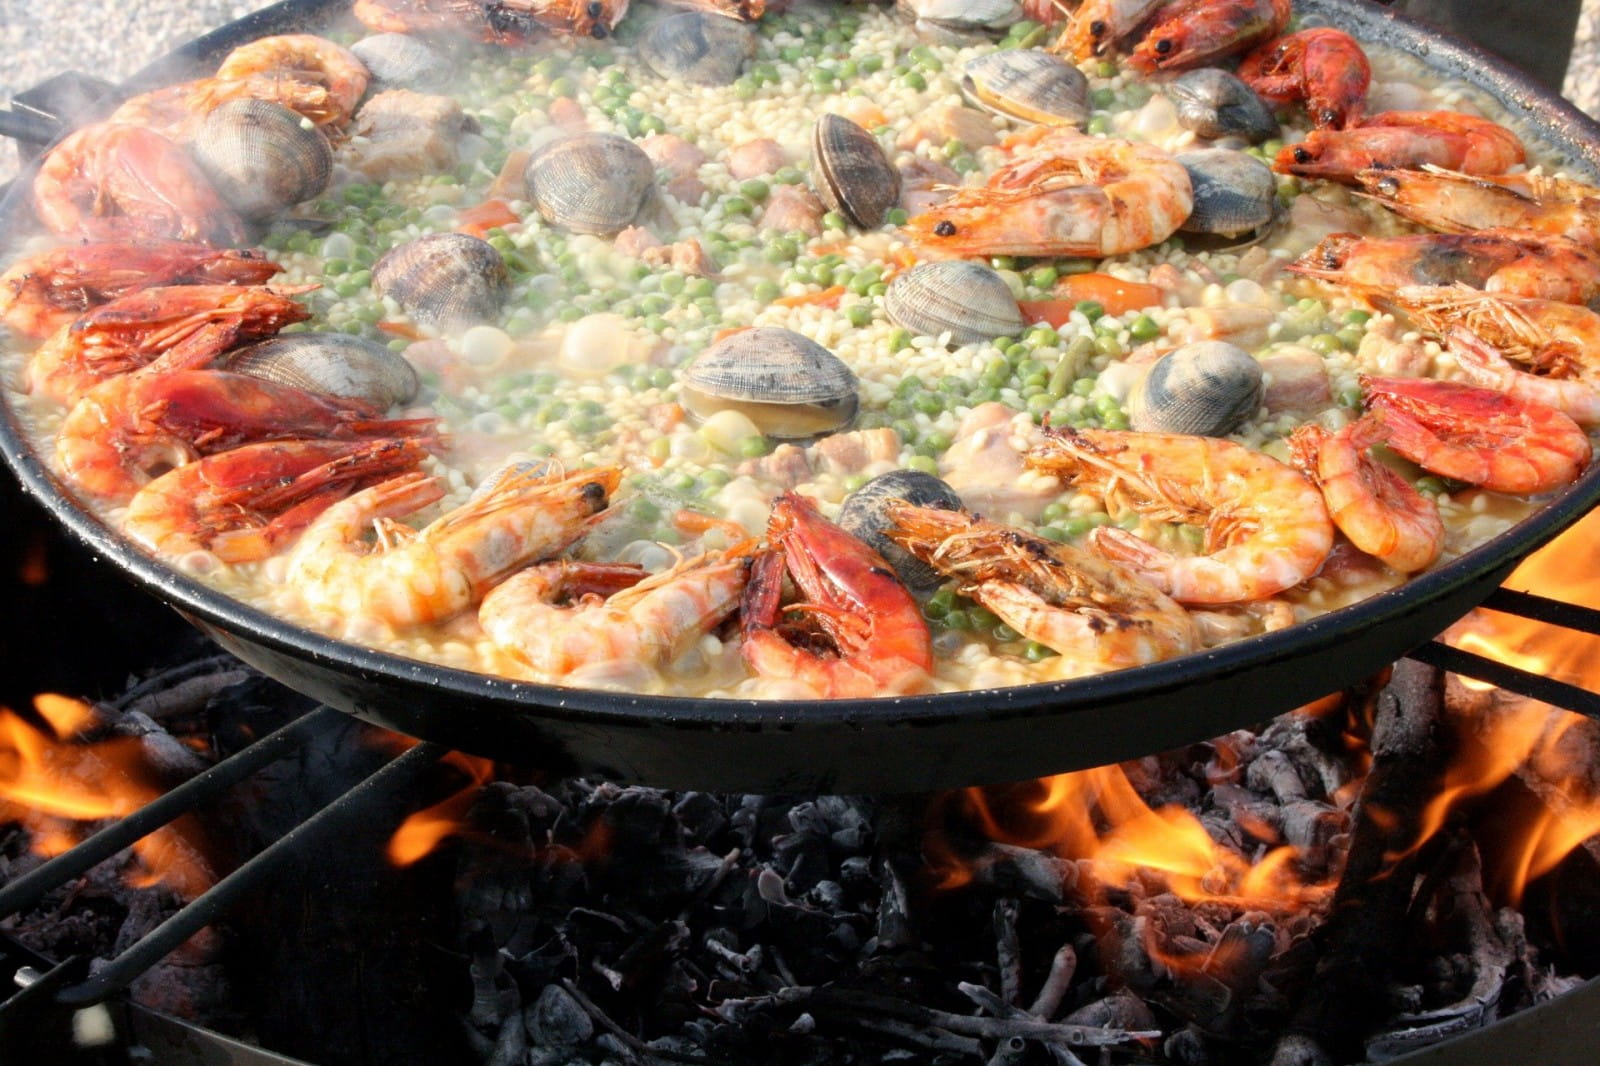 Which wine to drink with paella?